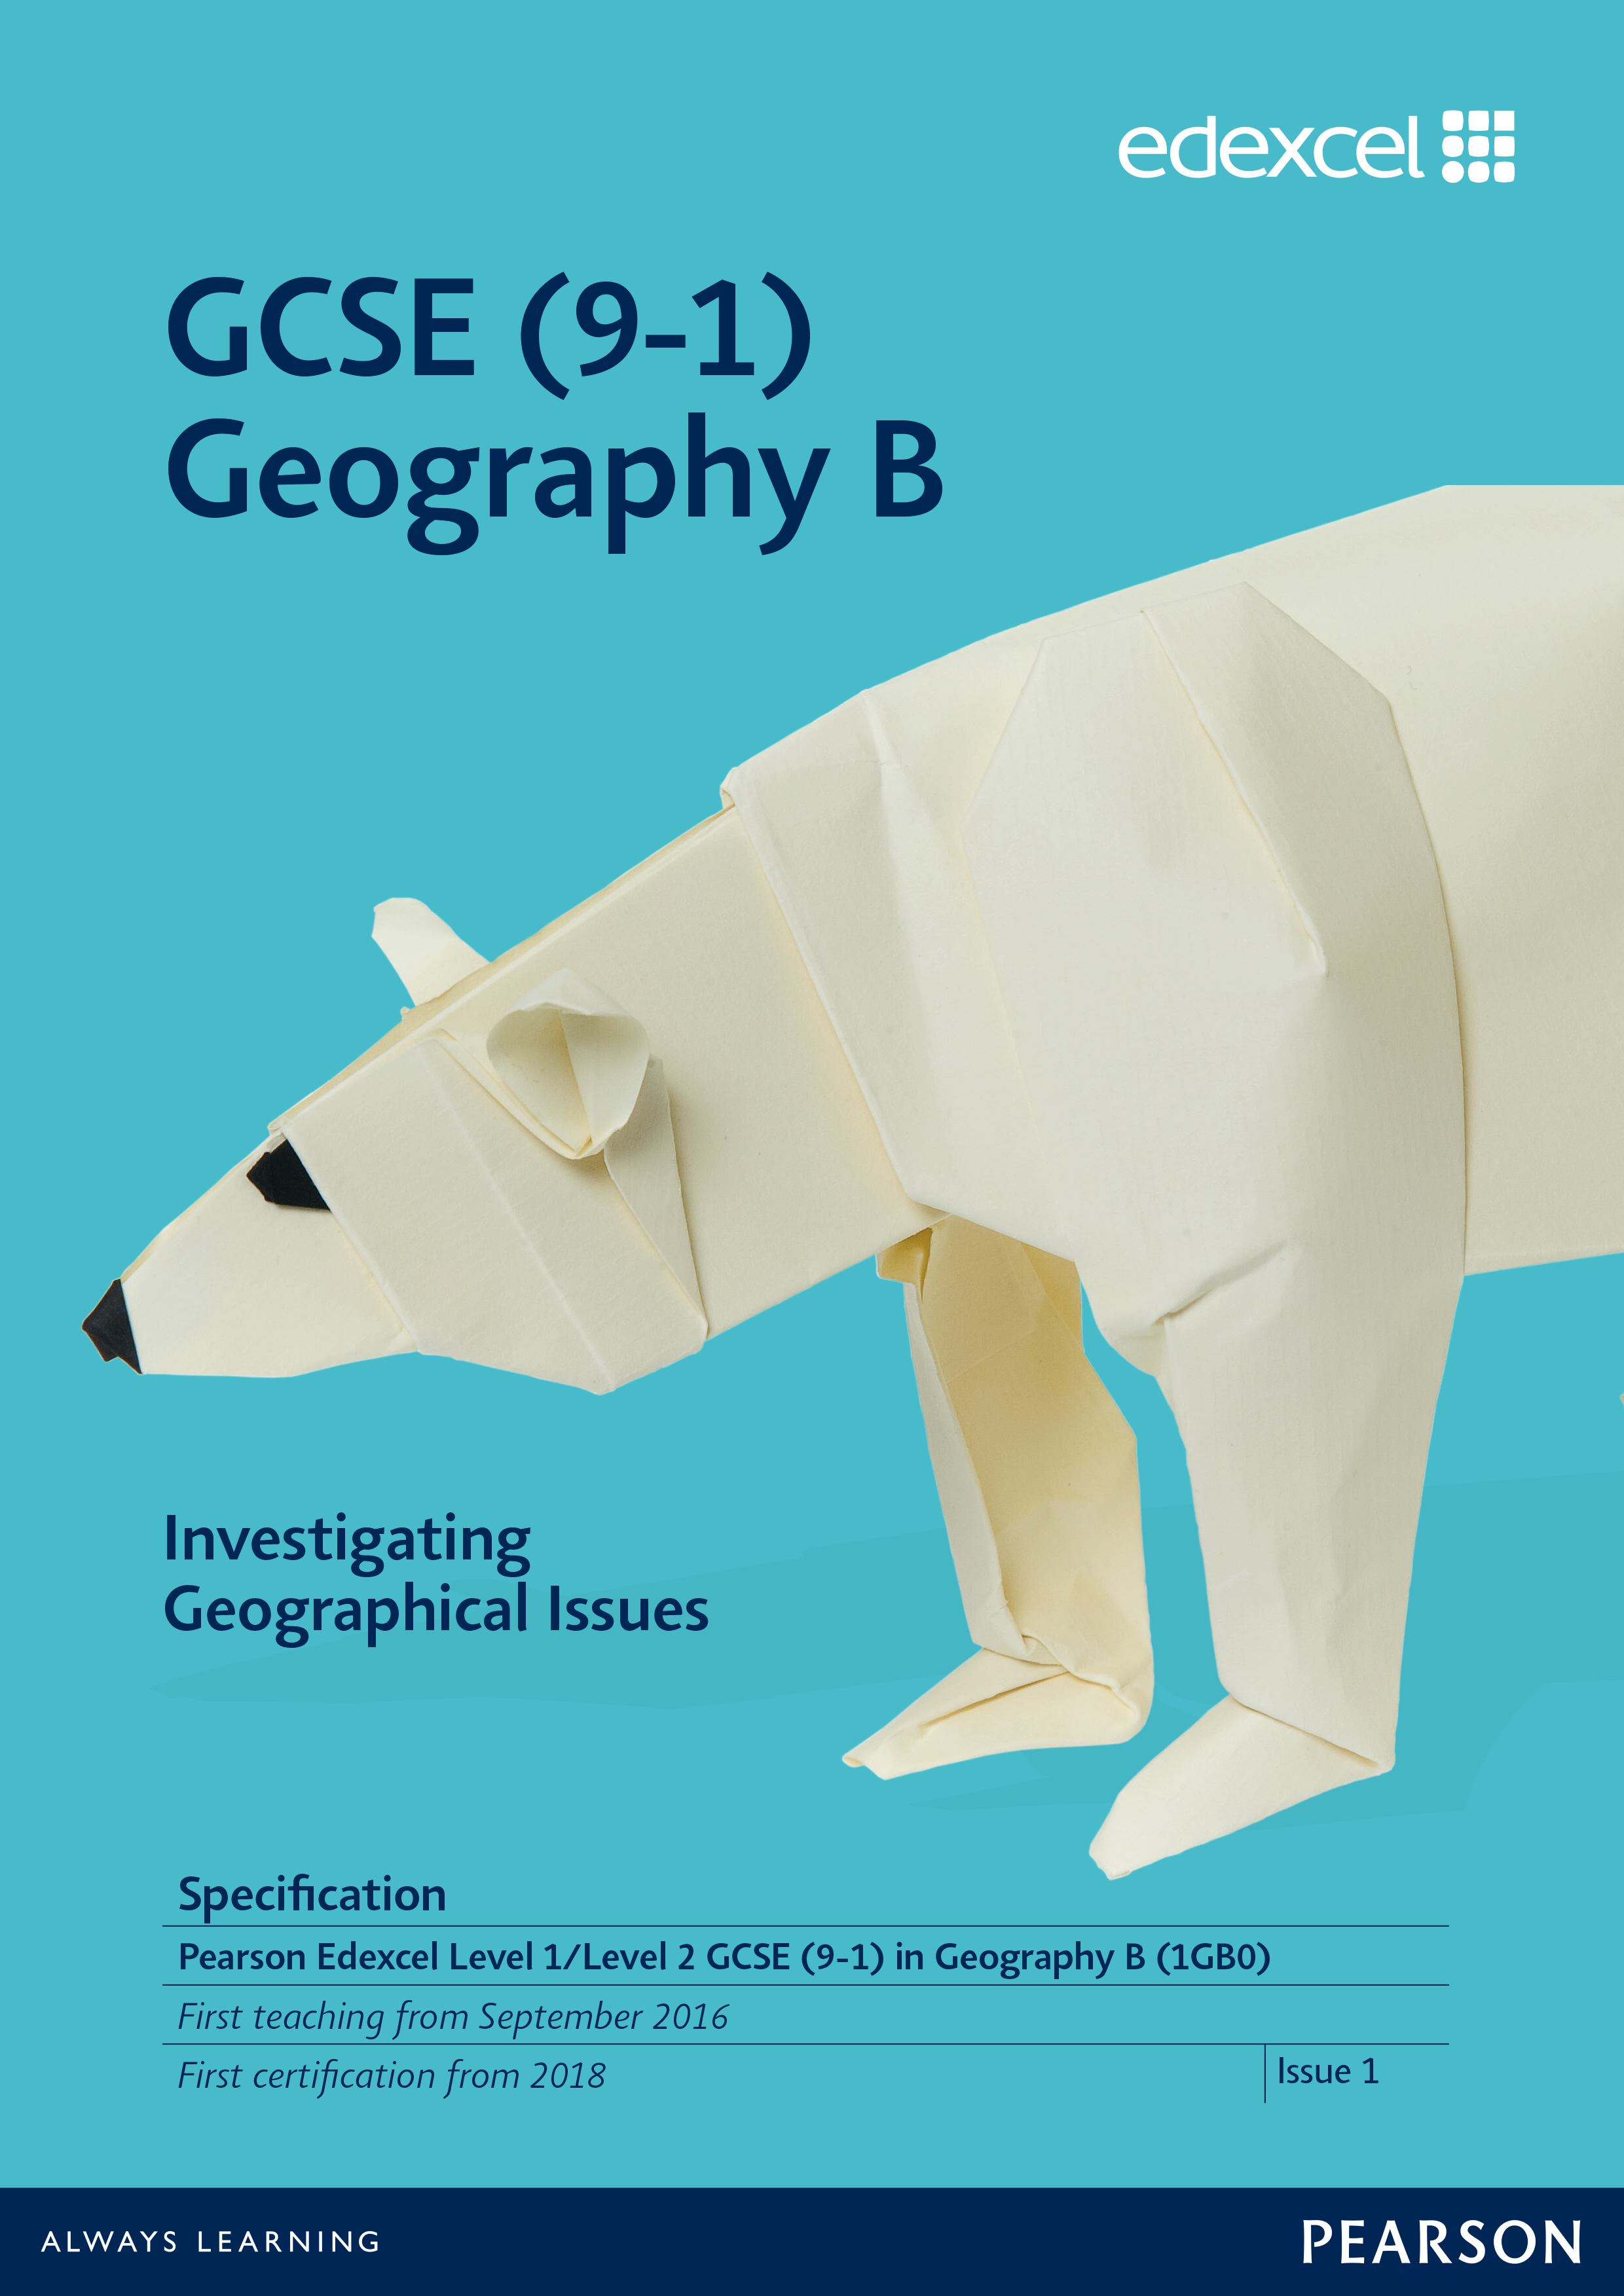 Link to Edexcel GCSE Geography B (2016) specification page